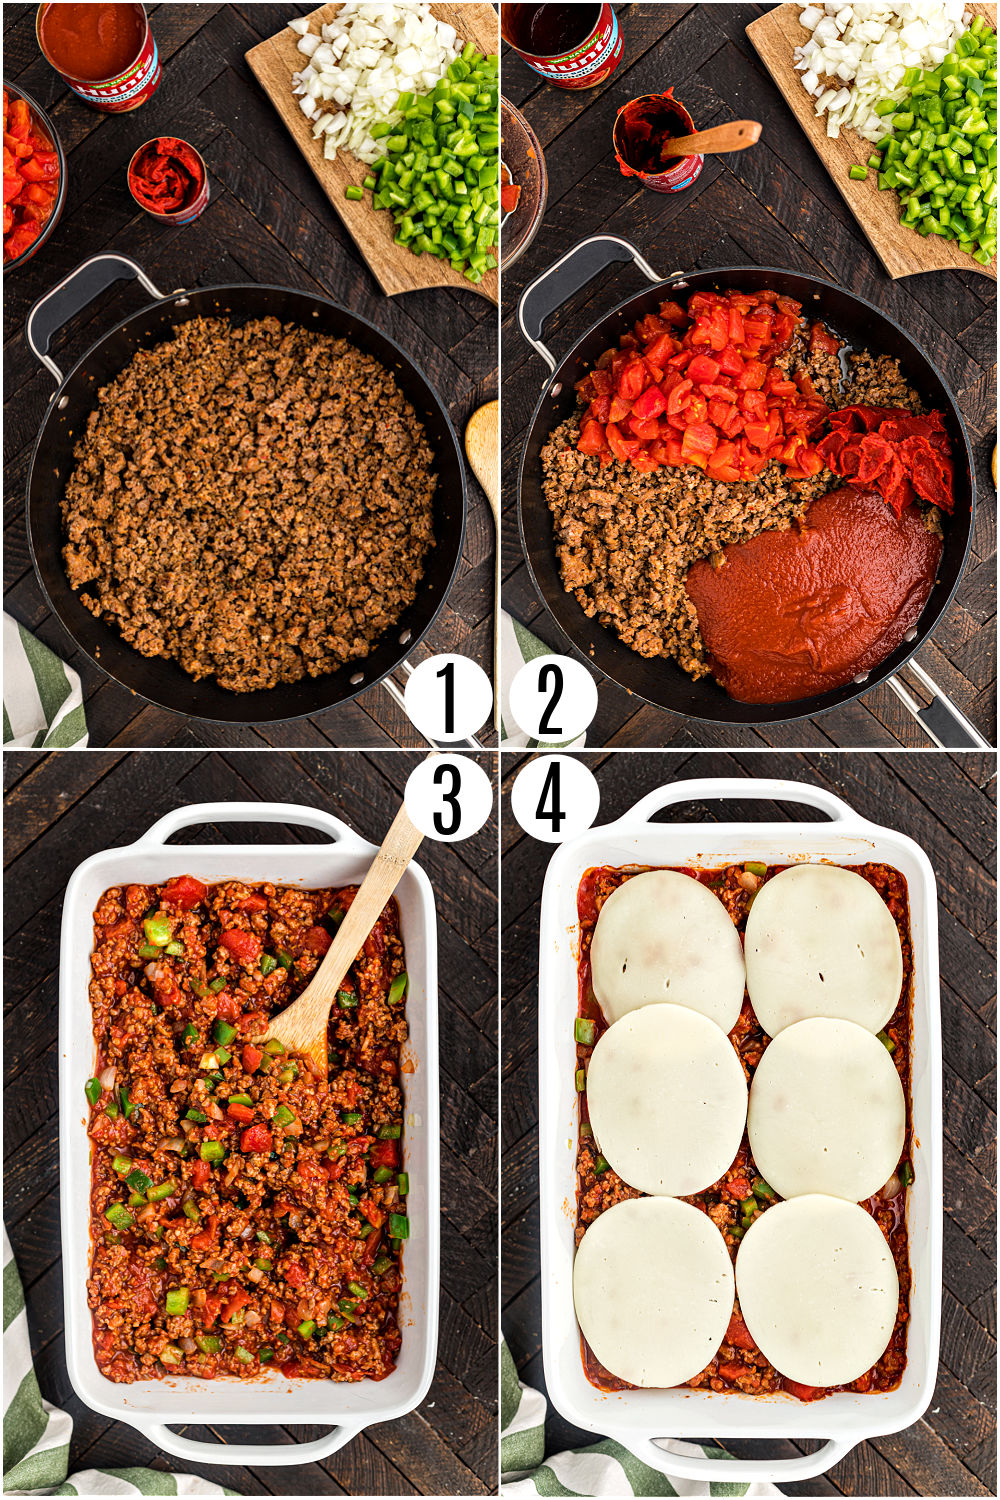 Step by step photos showing how to make sausage and peppers casserole.